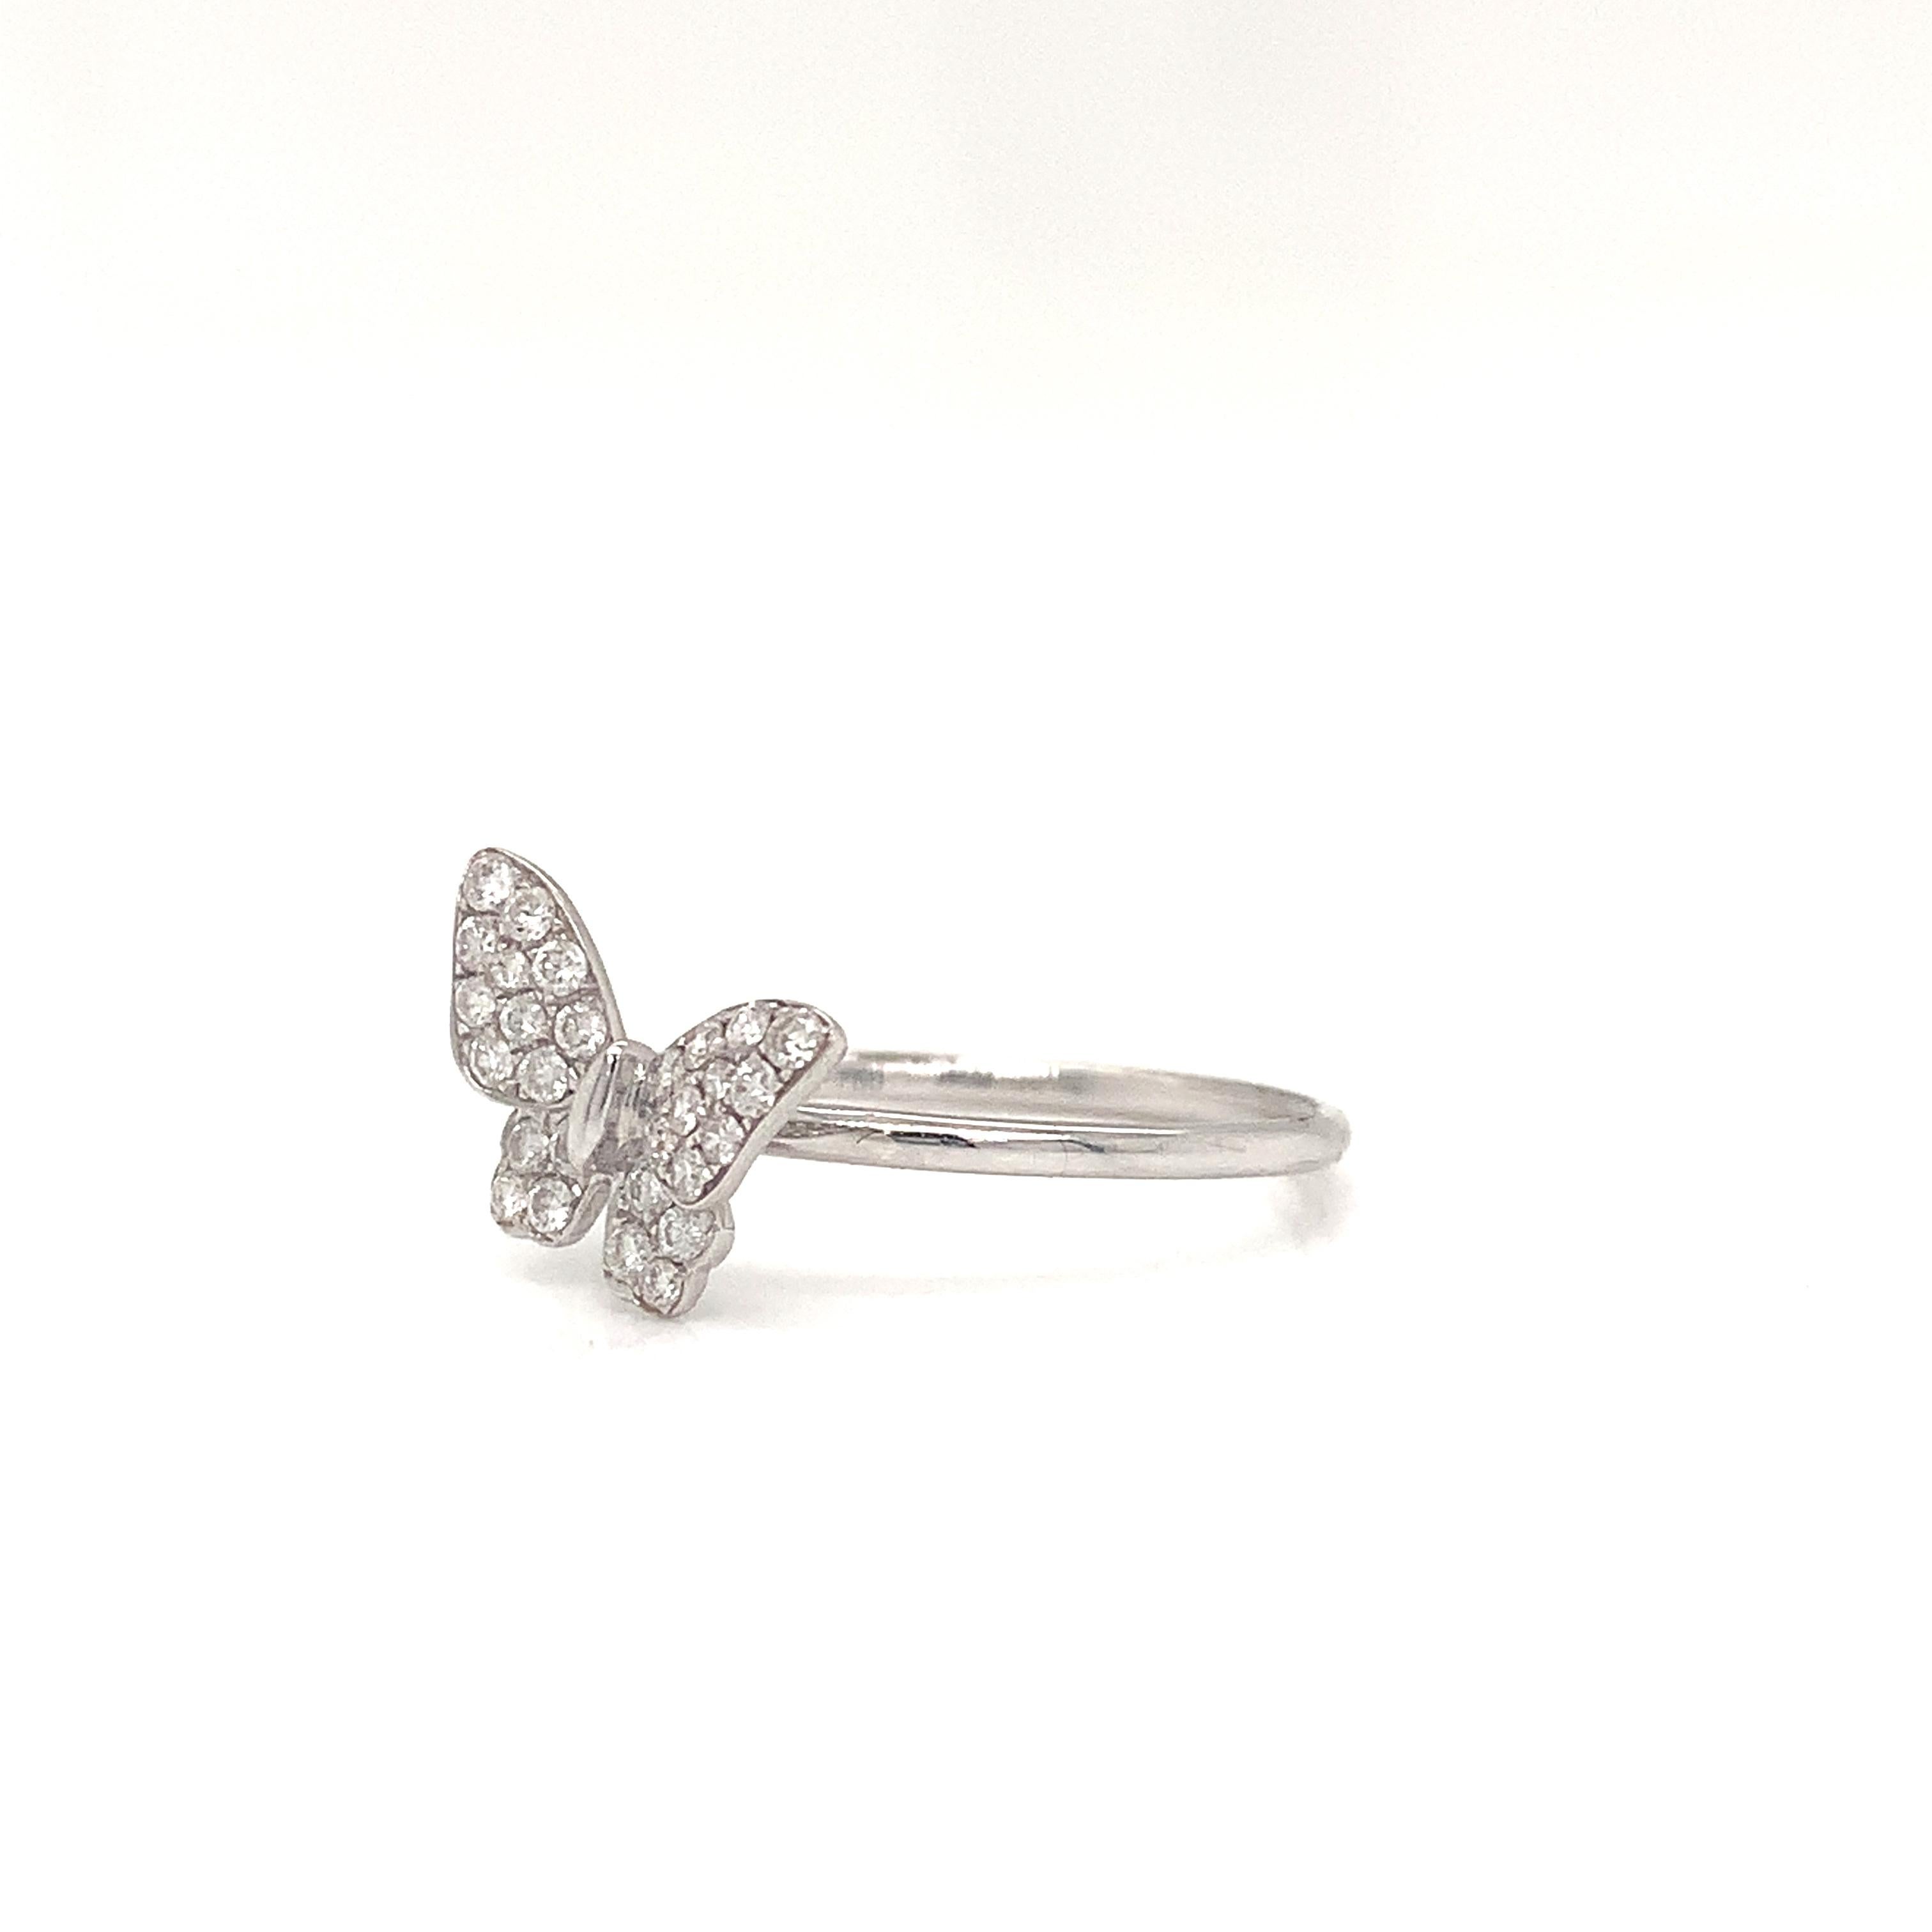 This sophisticated butterfly ring is crafted of 18k white gold with 0.45 total carat weight of diamonds in F Color and VS1 clarity.

 

About us:
Cashingdiamonds is not an authorized dealer or licensor of any of the products we sell. We do not claim